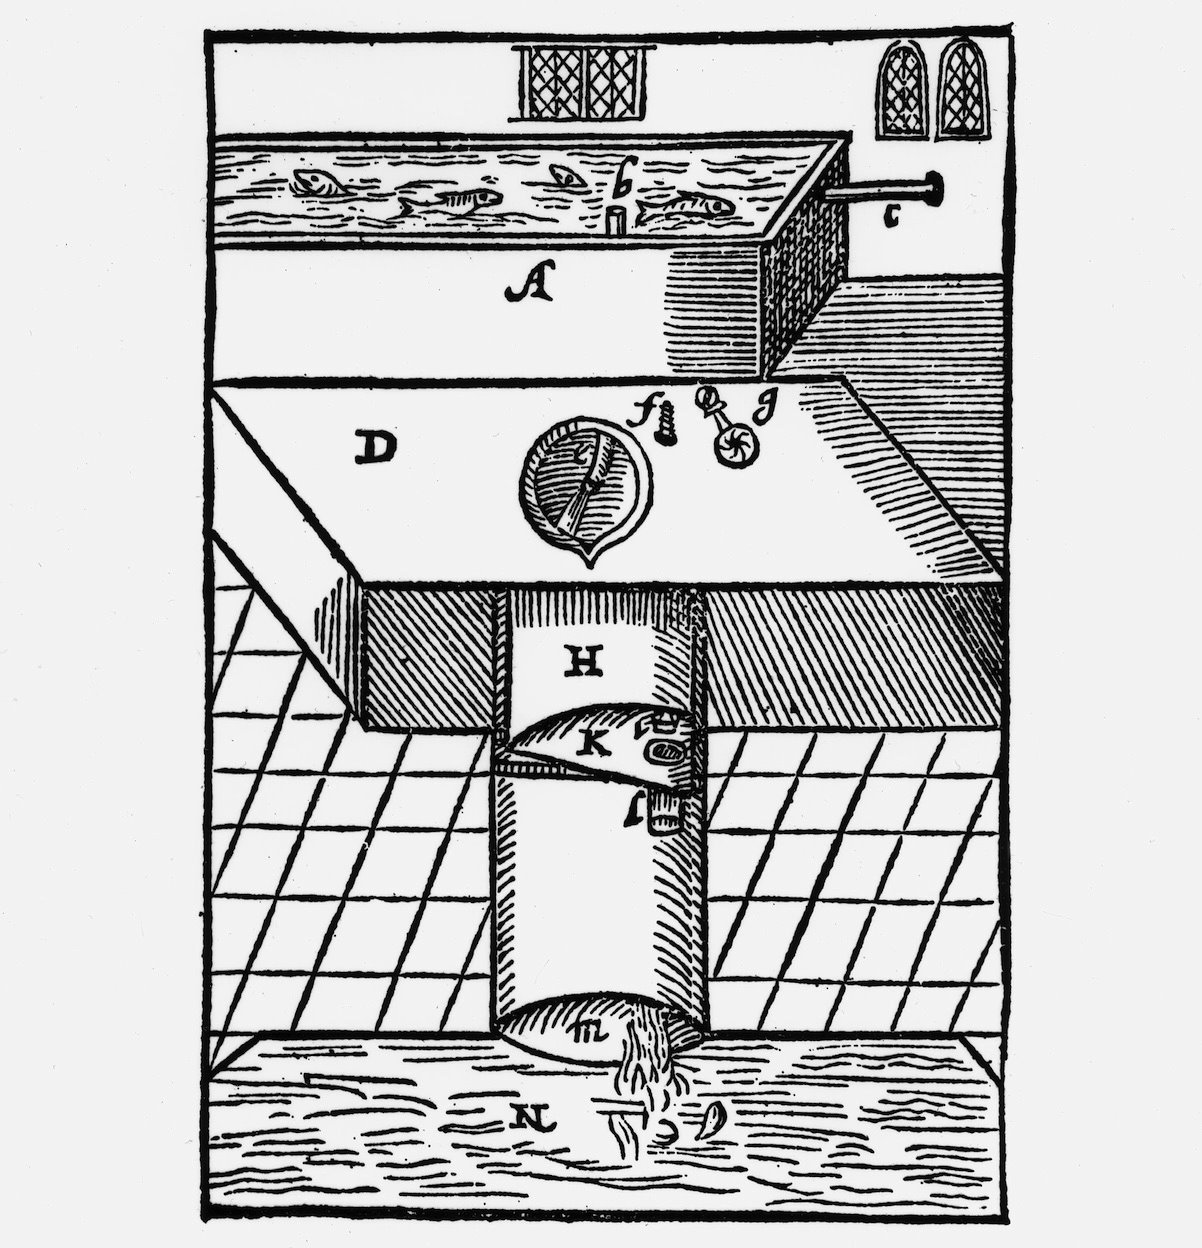 A detailed illustration of a water closet first described by John Harington - this is also a set of instructions for the installation of a water closet, which contained two of the elements of the modern flush toilet: a wash down system and a valve